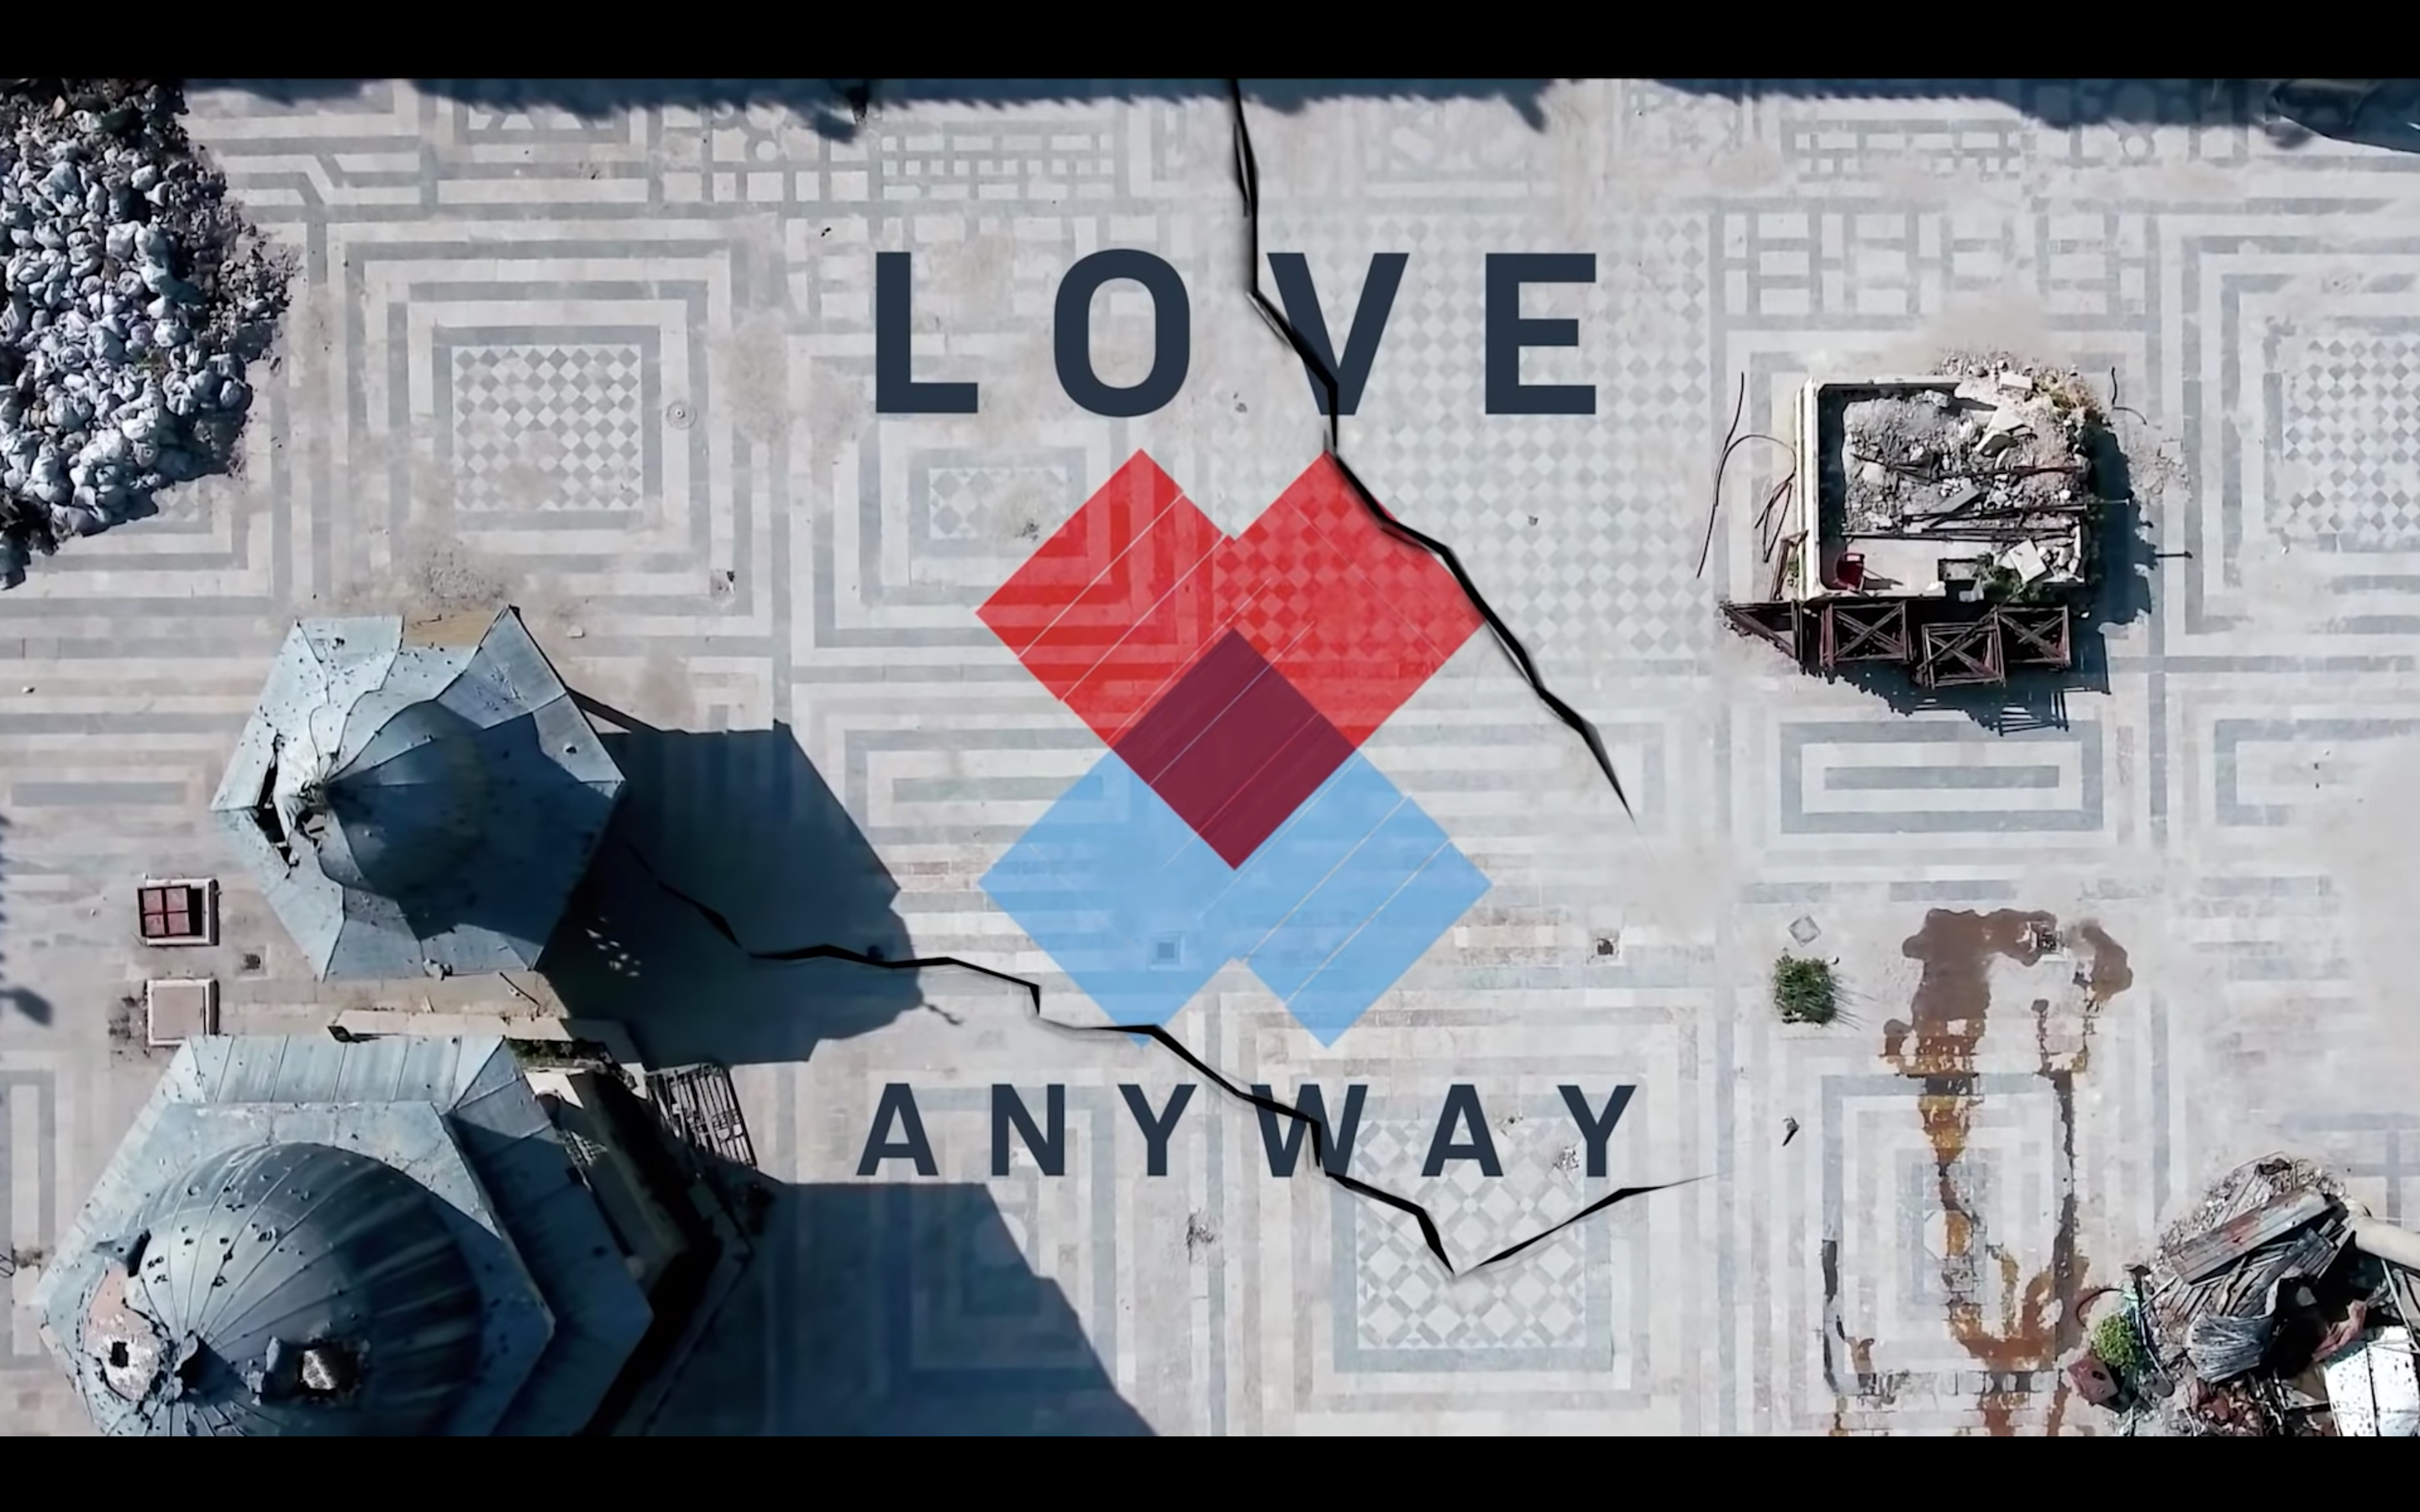 The short film "Love Anyway" was published by Preemptive Love on Youtube in 2019, and tells the story of Preemptive Love founders Jeremy and Jessica Courtney. Screengrab from Youtube video